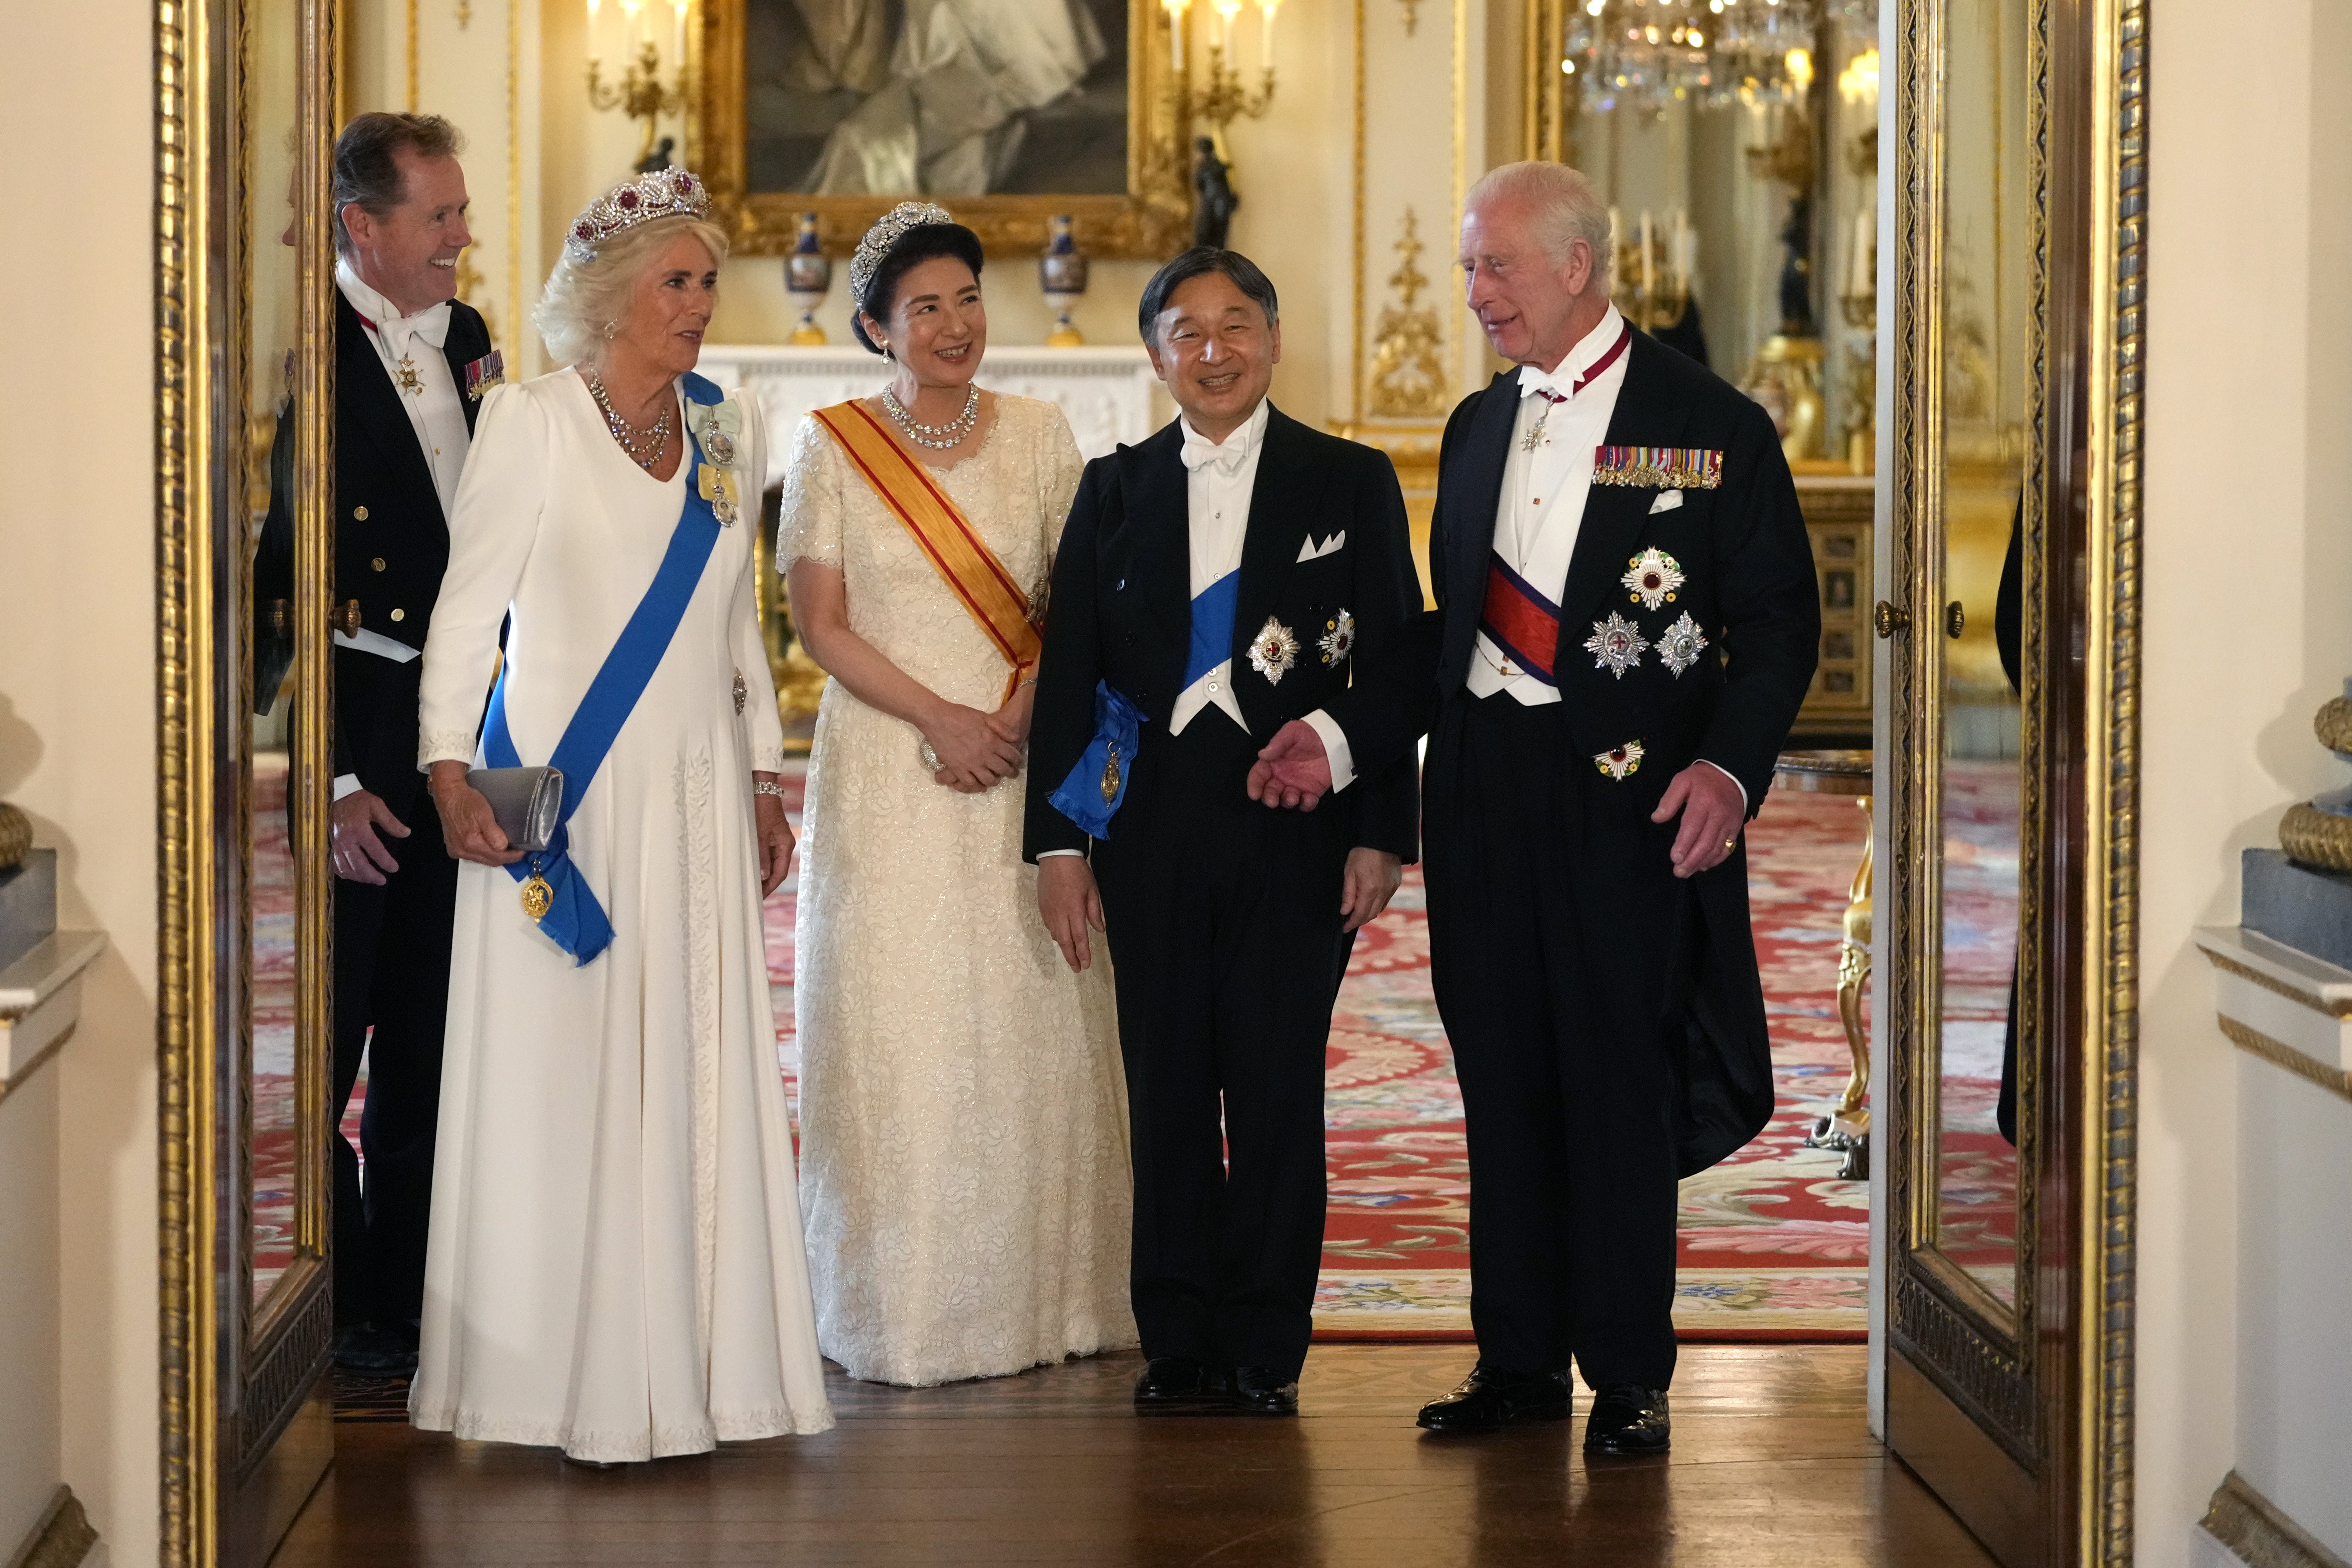 The King and Queen with Emperor Naruhito and his wife Empress Masako of Japan ahead of the State Banquet at Buckingham Palace (Kirsty Wigglesworth/PA)